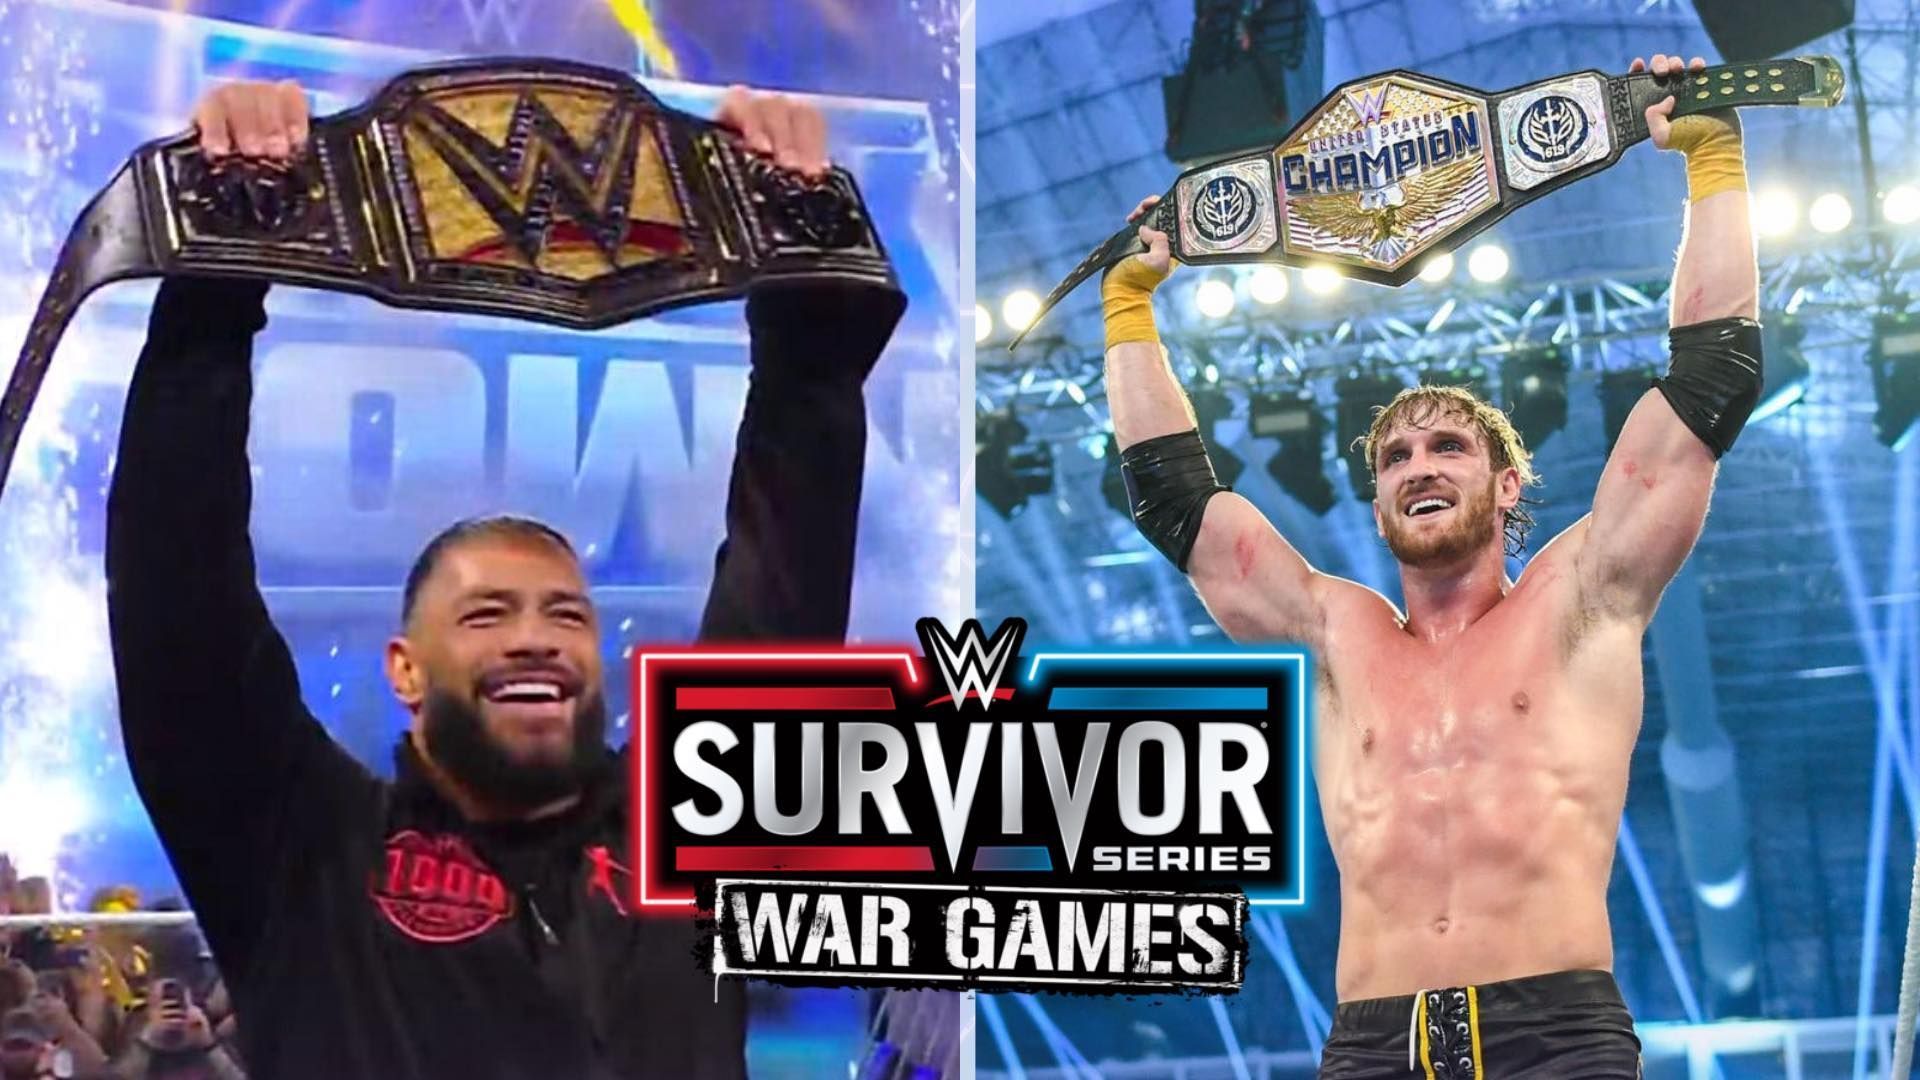 Several WWE stars and champions may not appear at Survivor Series WarGames